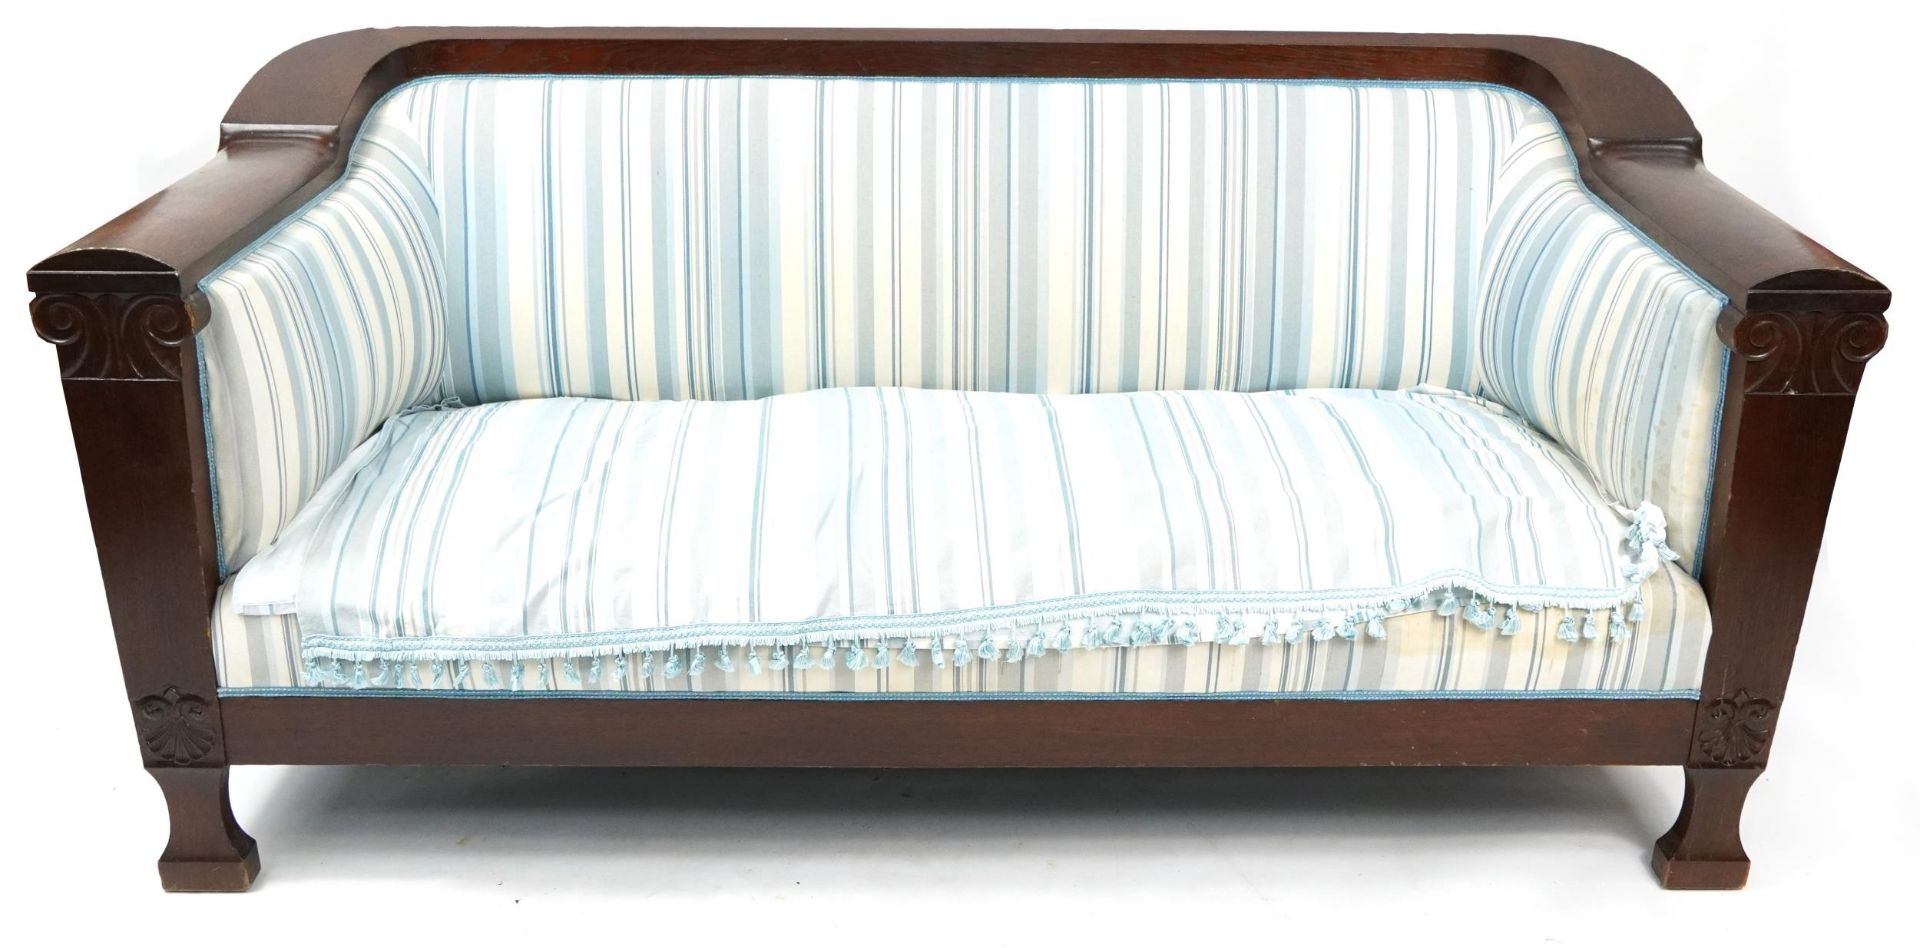 Carved mahogany framed settee with blue striped upholstery, 185cm wide